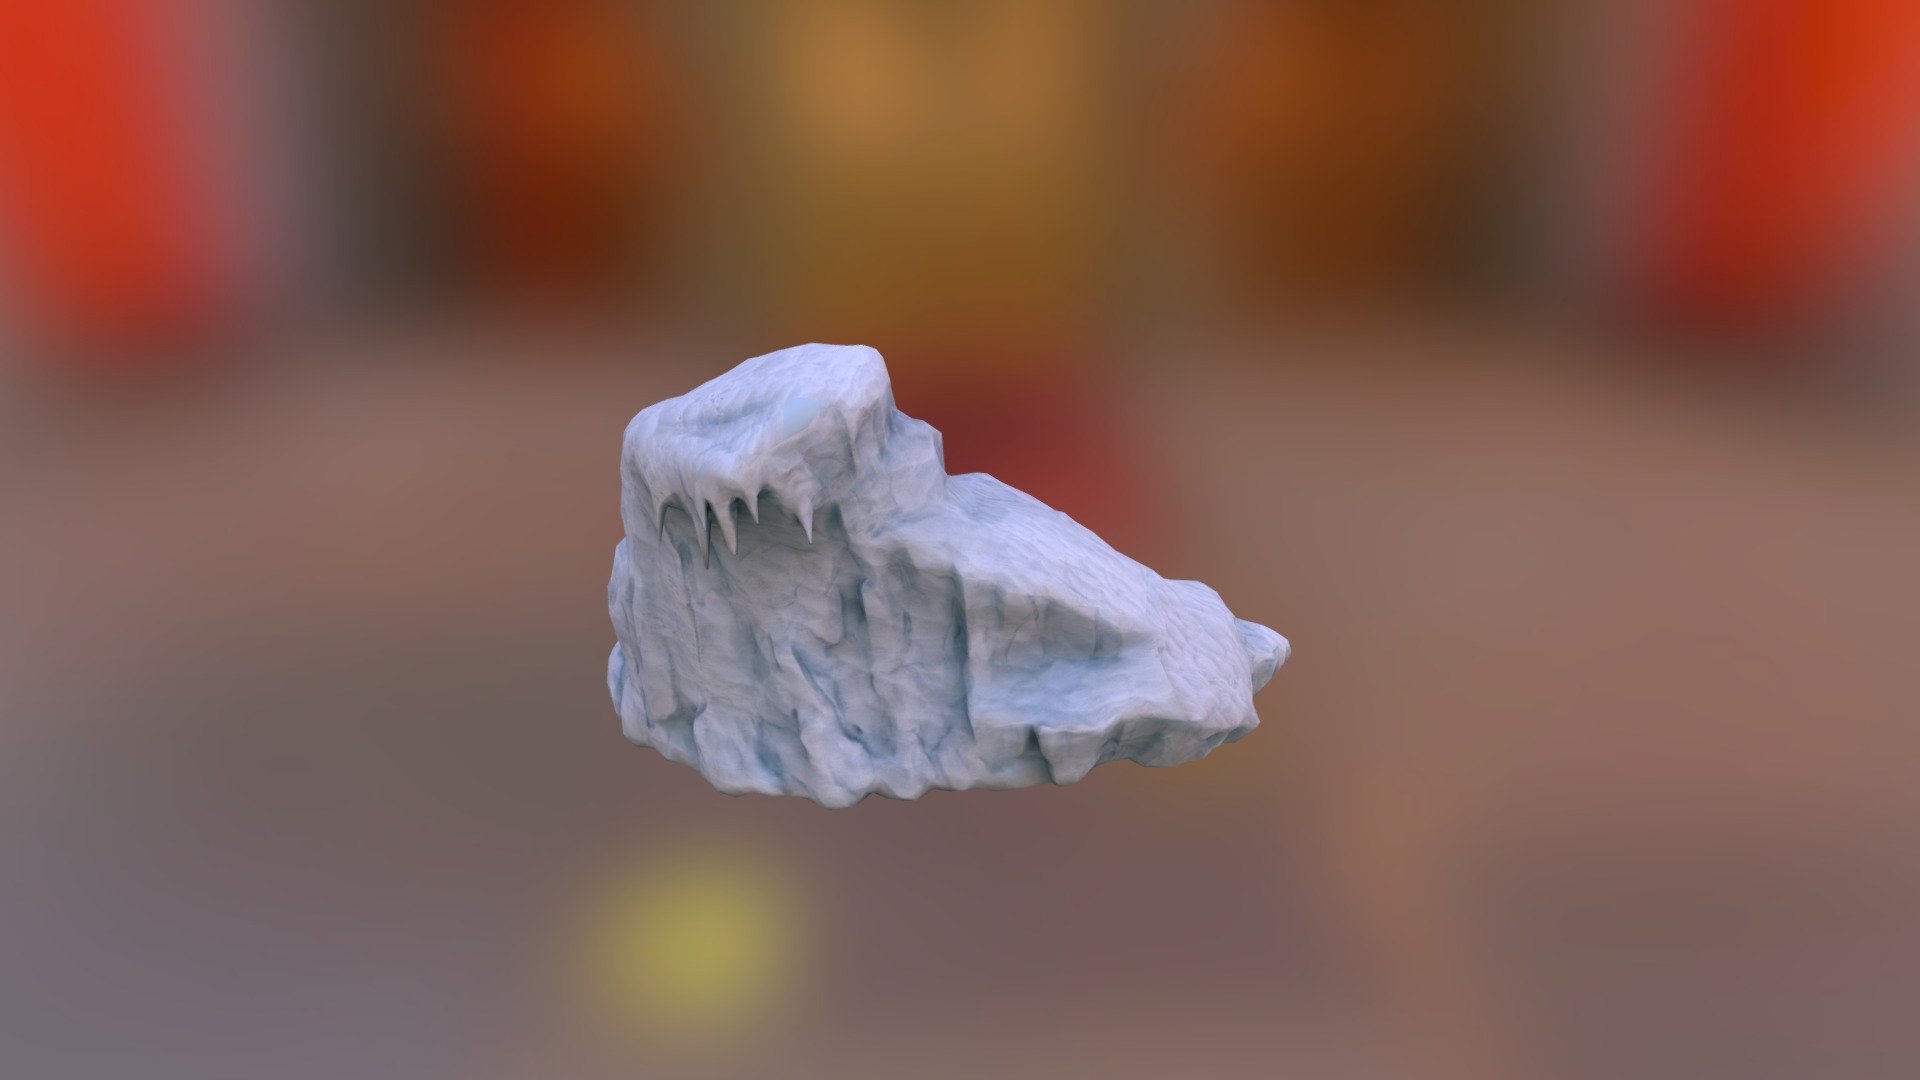 Game ready Iceberg model comes with Normal texture map and Color texture map - Iceberg_5 - 3D model by Creative Market (@creativemarket) 3d model